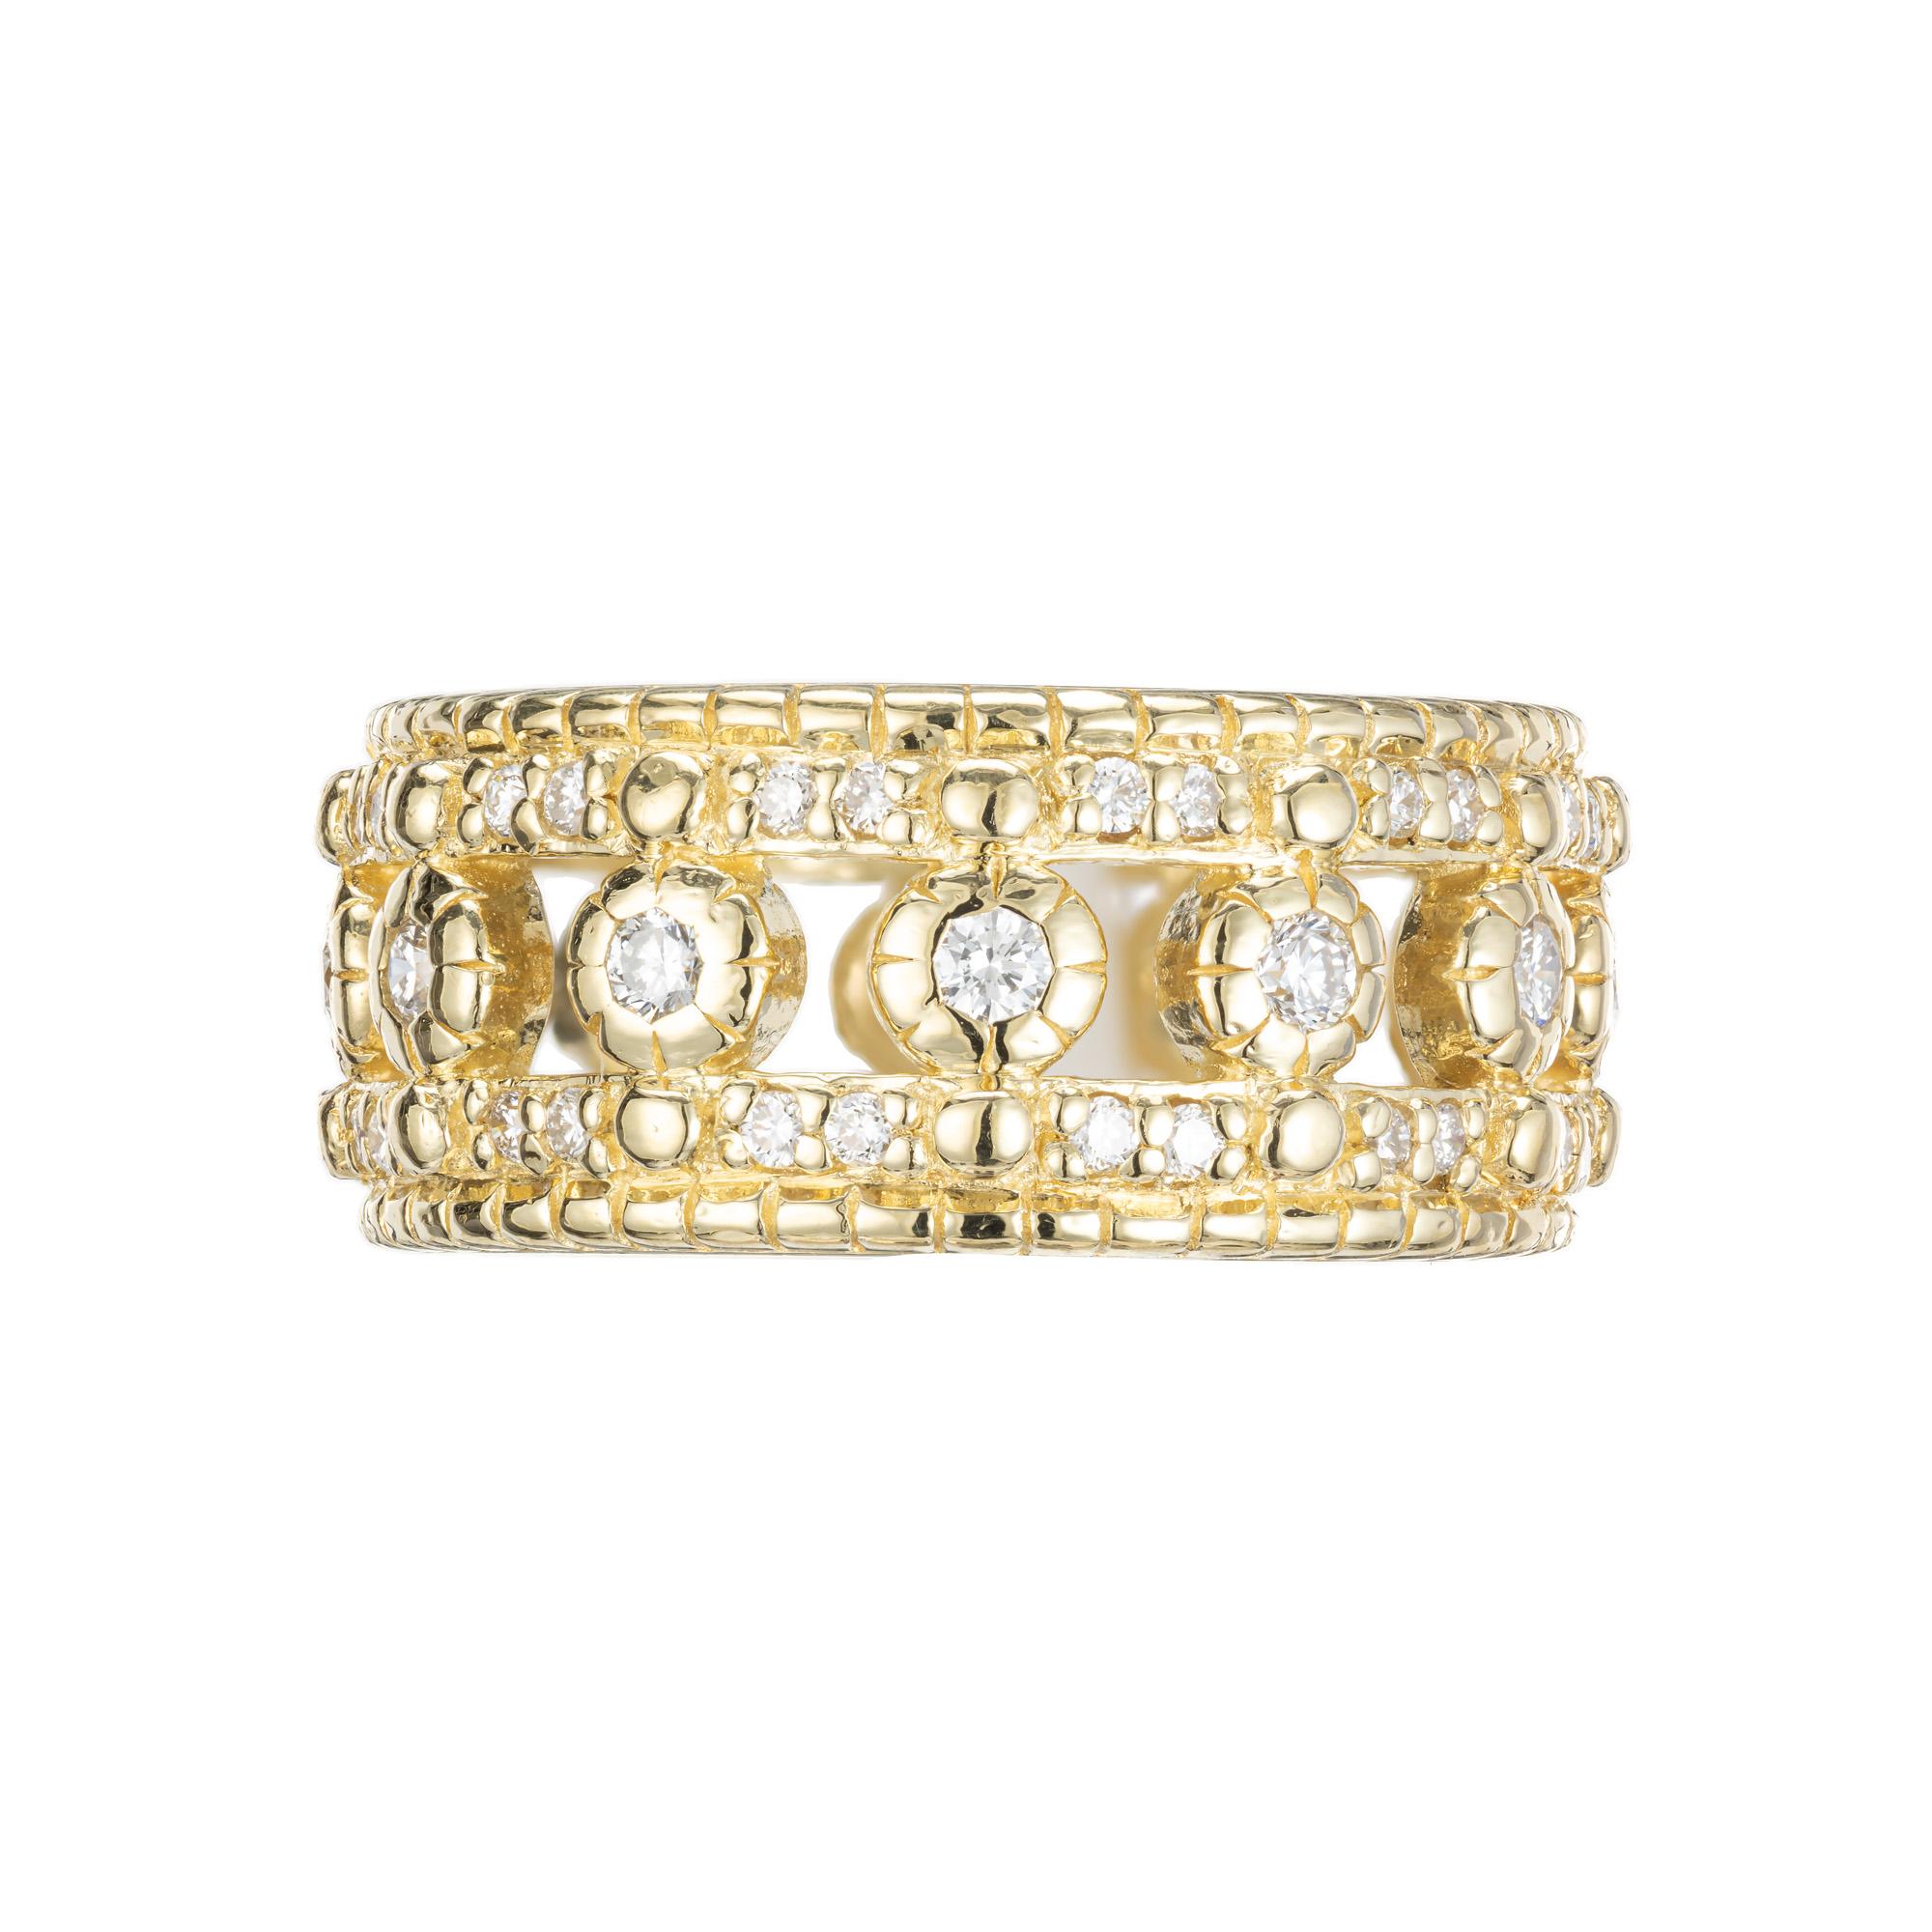 Judith Ripka bold wide diamond Eternity Wedding band ring. As a perfect example of Judith Ripka's craftsmanship, this 18k yellow gold band is enriched with 62 round brilliant cut diamonds totaling approximately .62 carts. Size 4 1/2. possibly